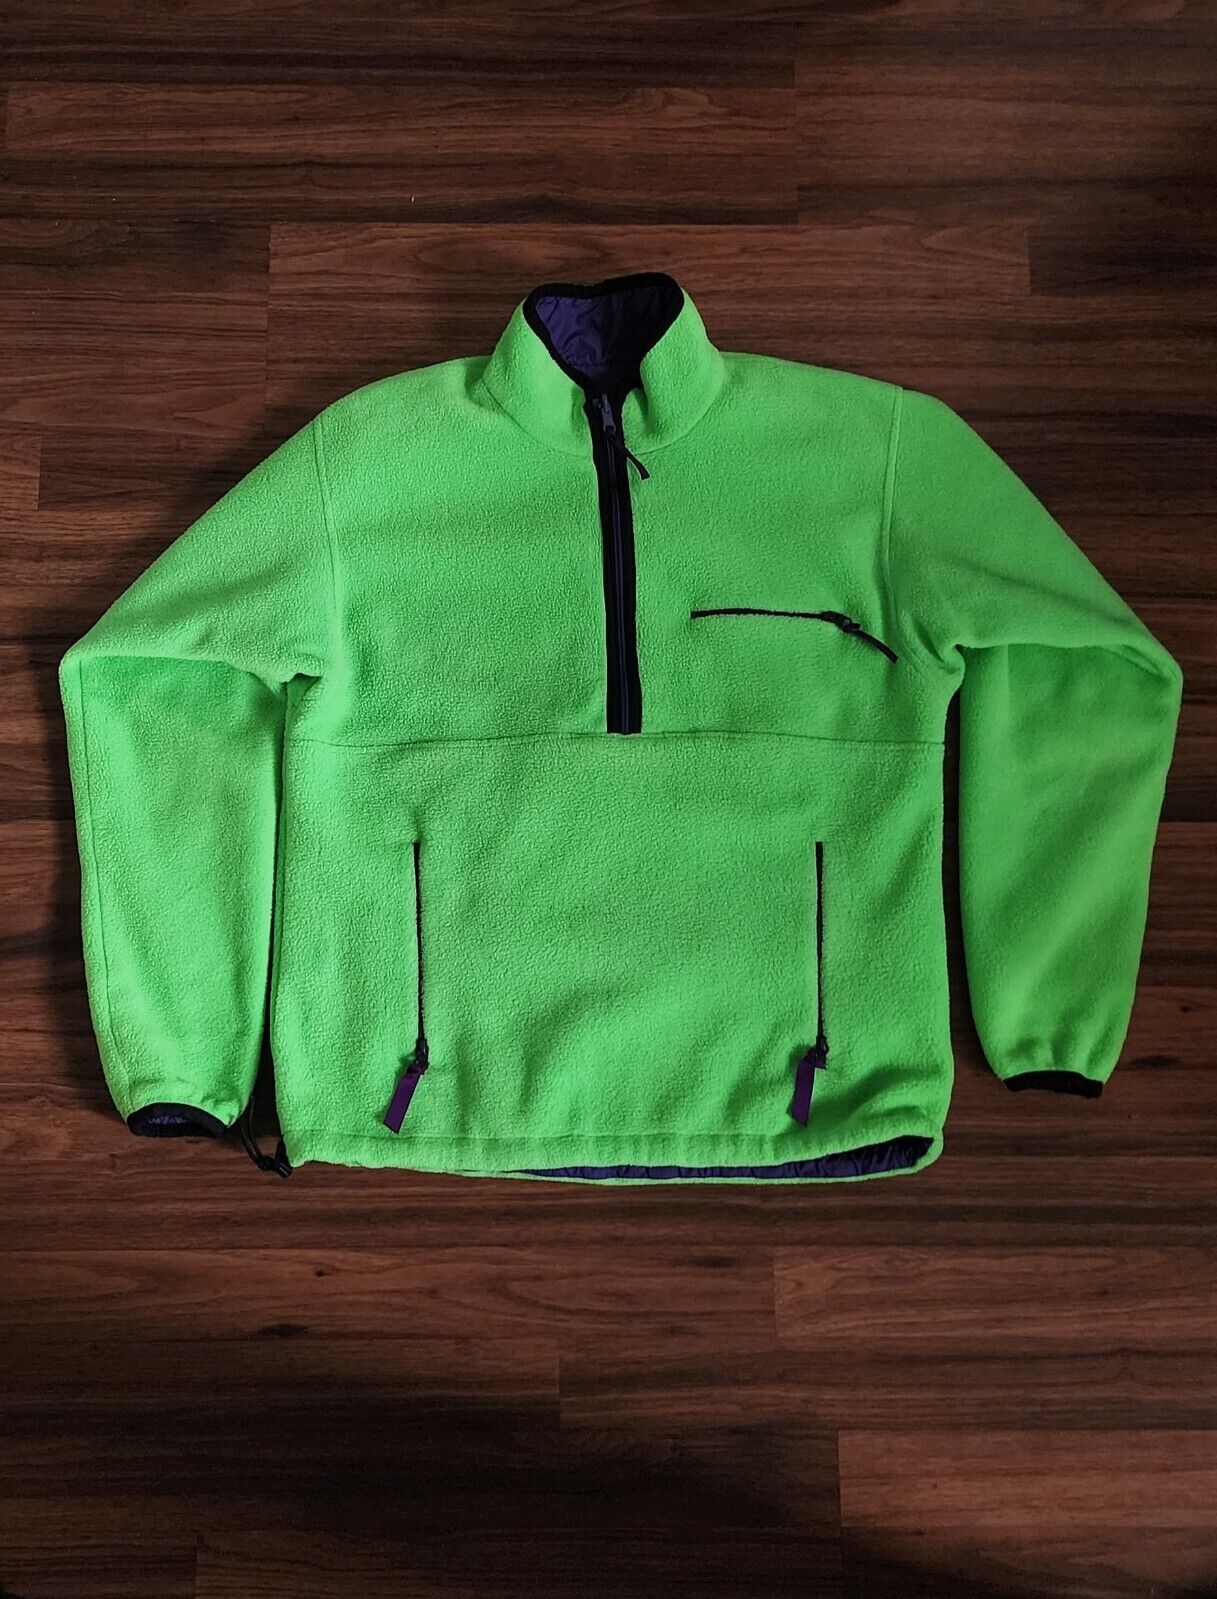 Rare 90s Patagonia reversible fleece snap T pull over jacket Size Medium